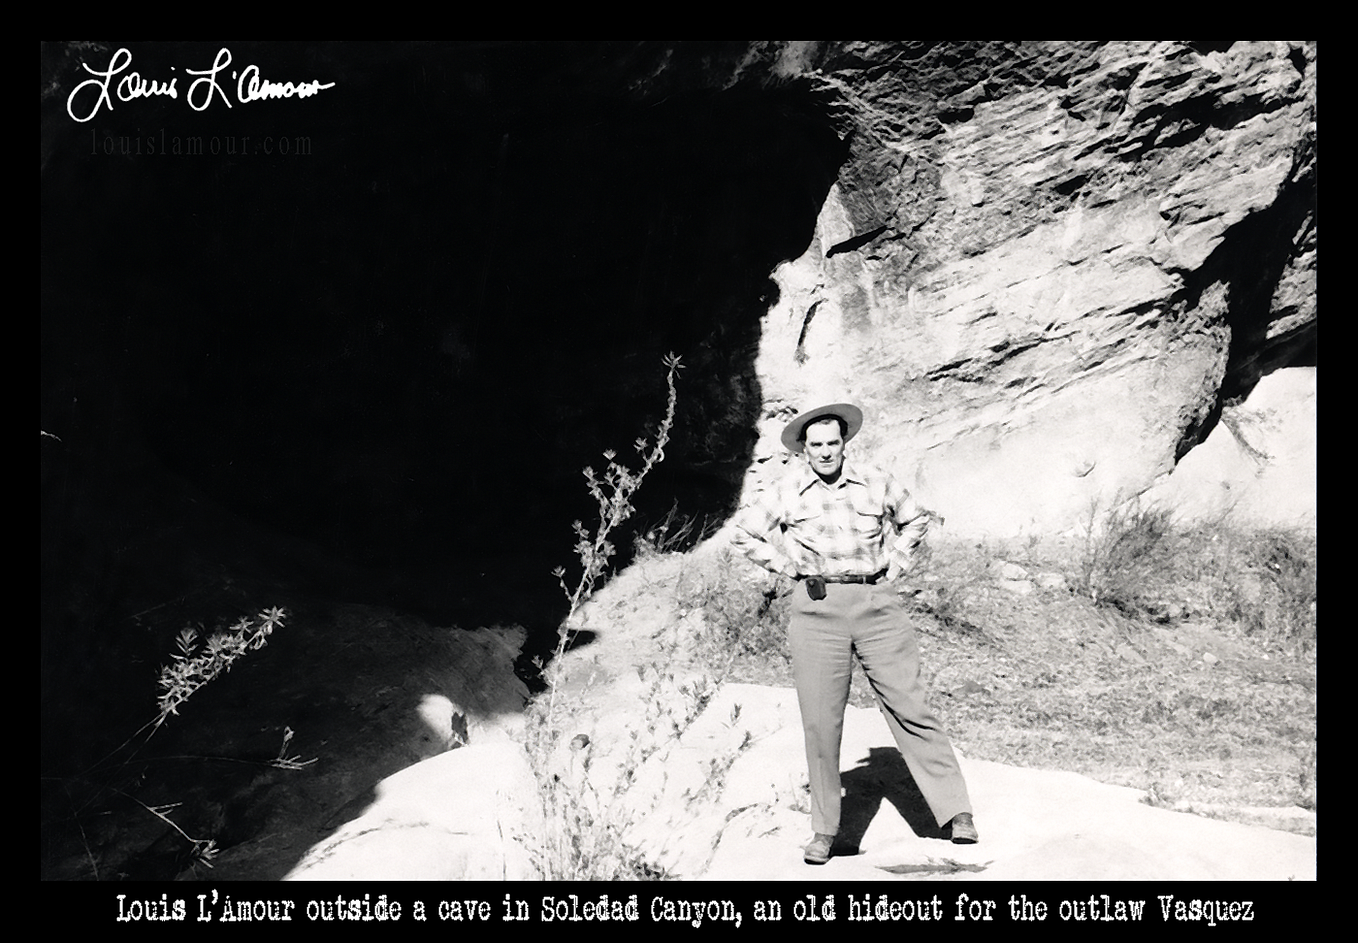 Louis L’Amour, like his character William Tell Sackett, walked the canyons, caves, deserts and…